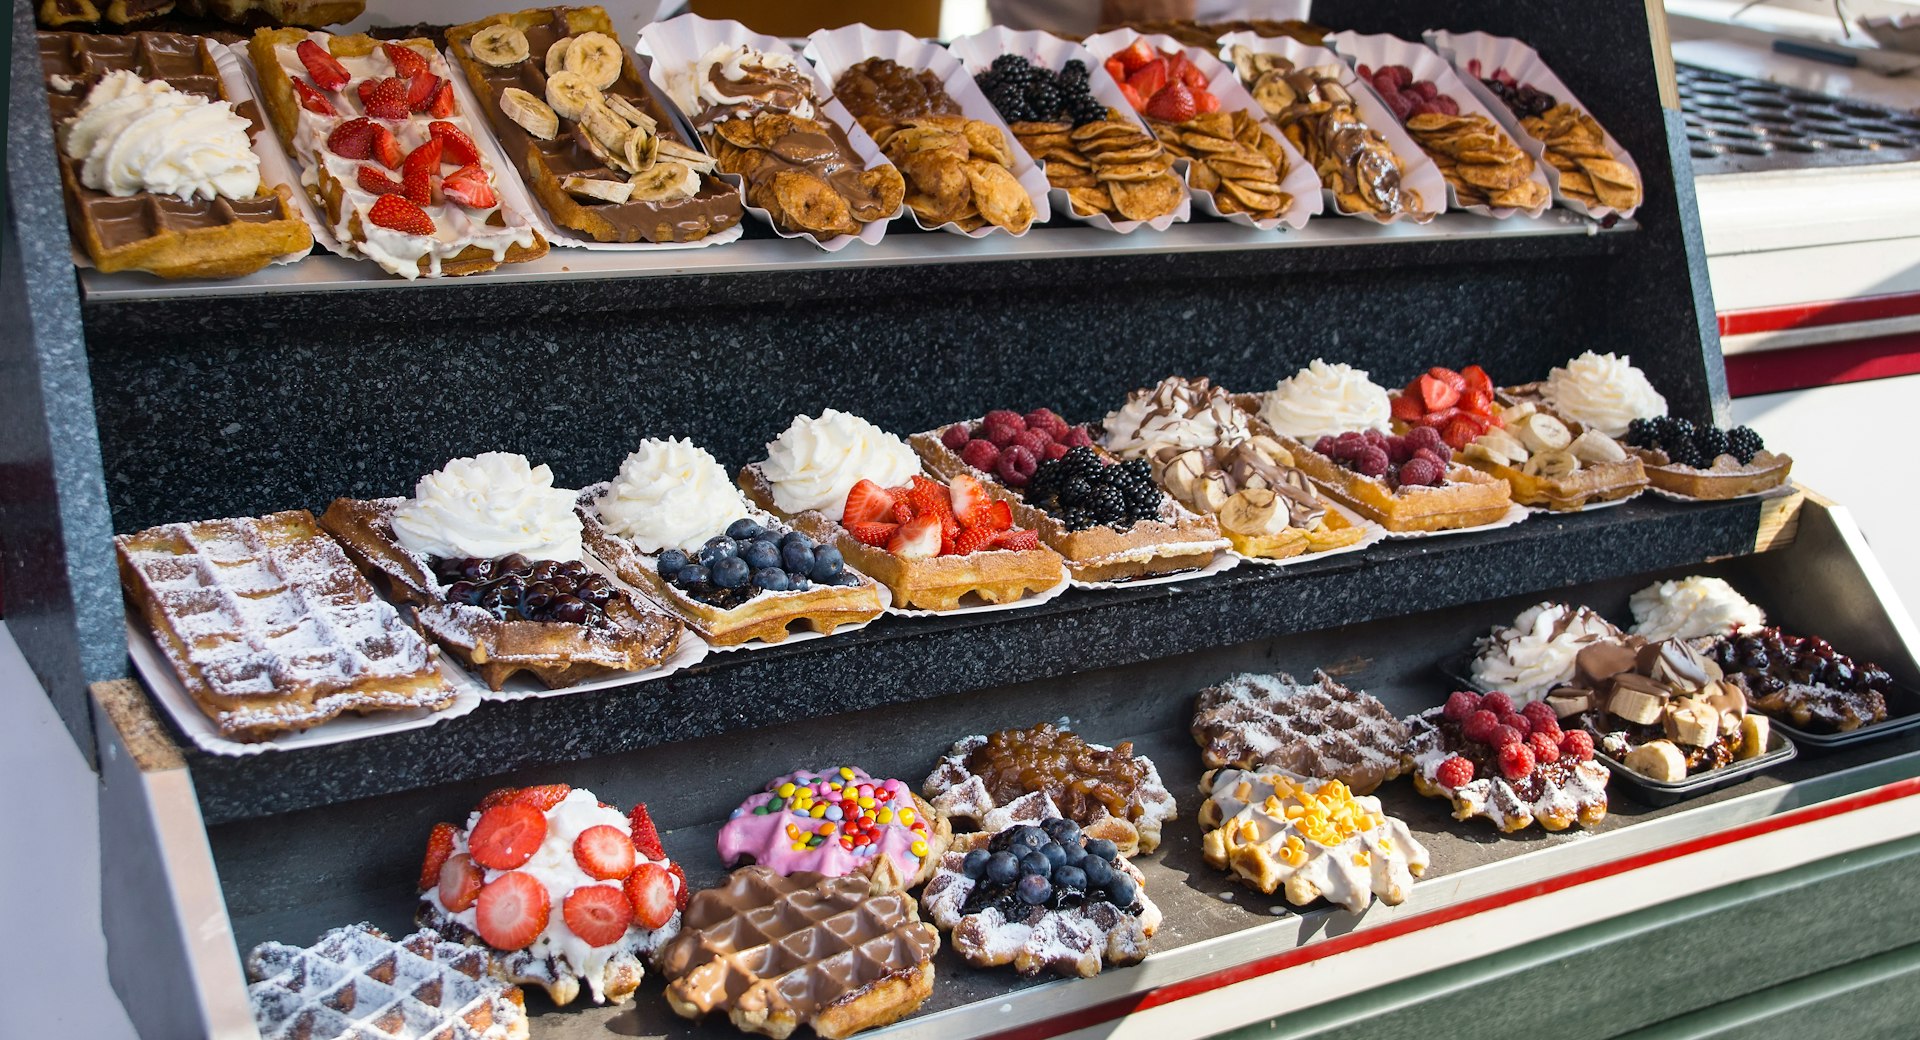 A display of waffles covered in many different toppings including fruit, cream and chocolate sauce